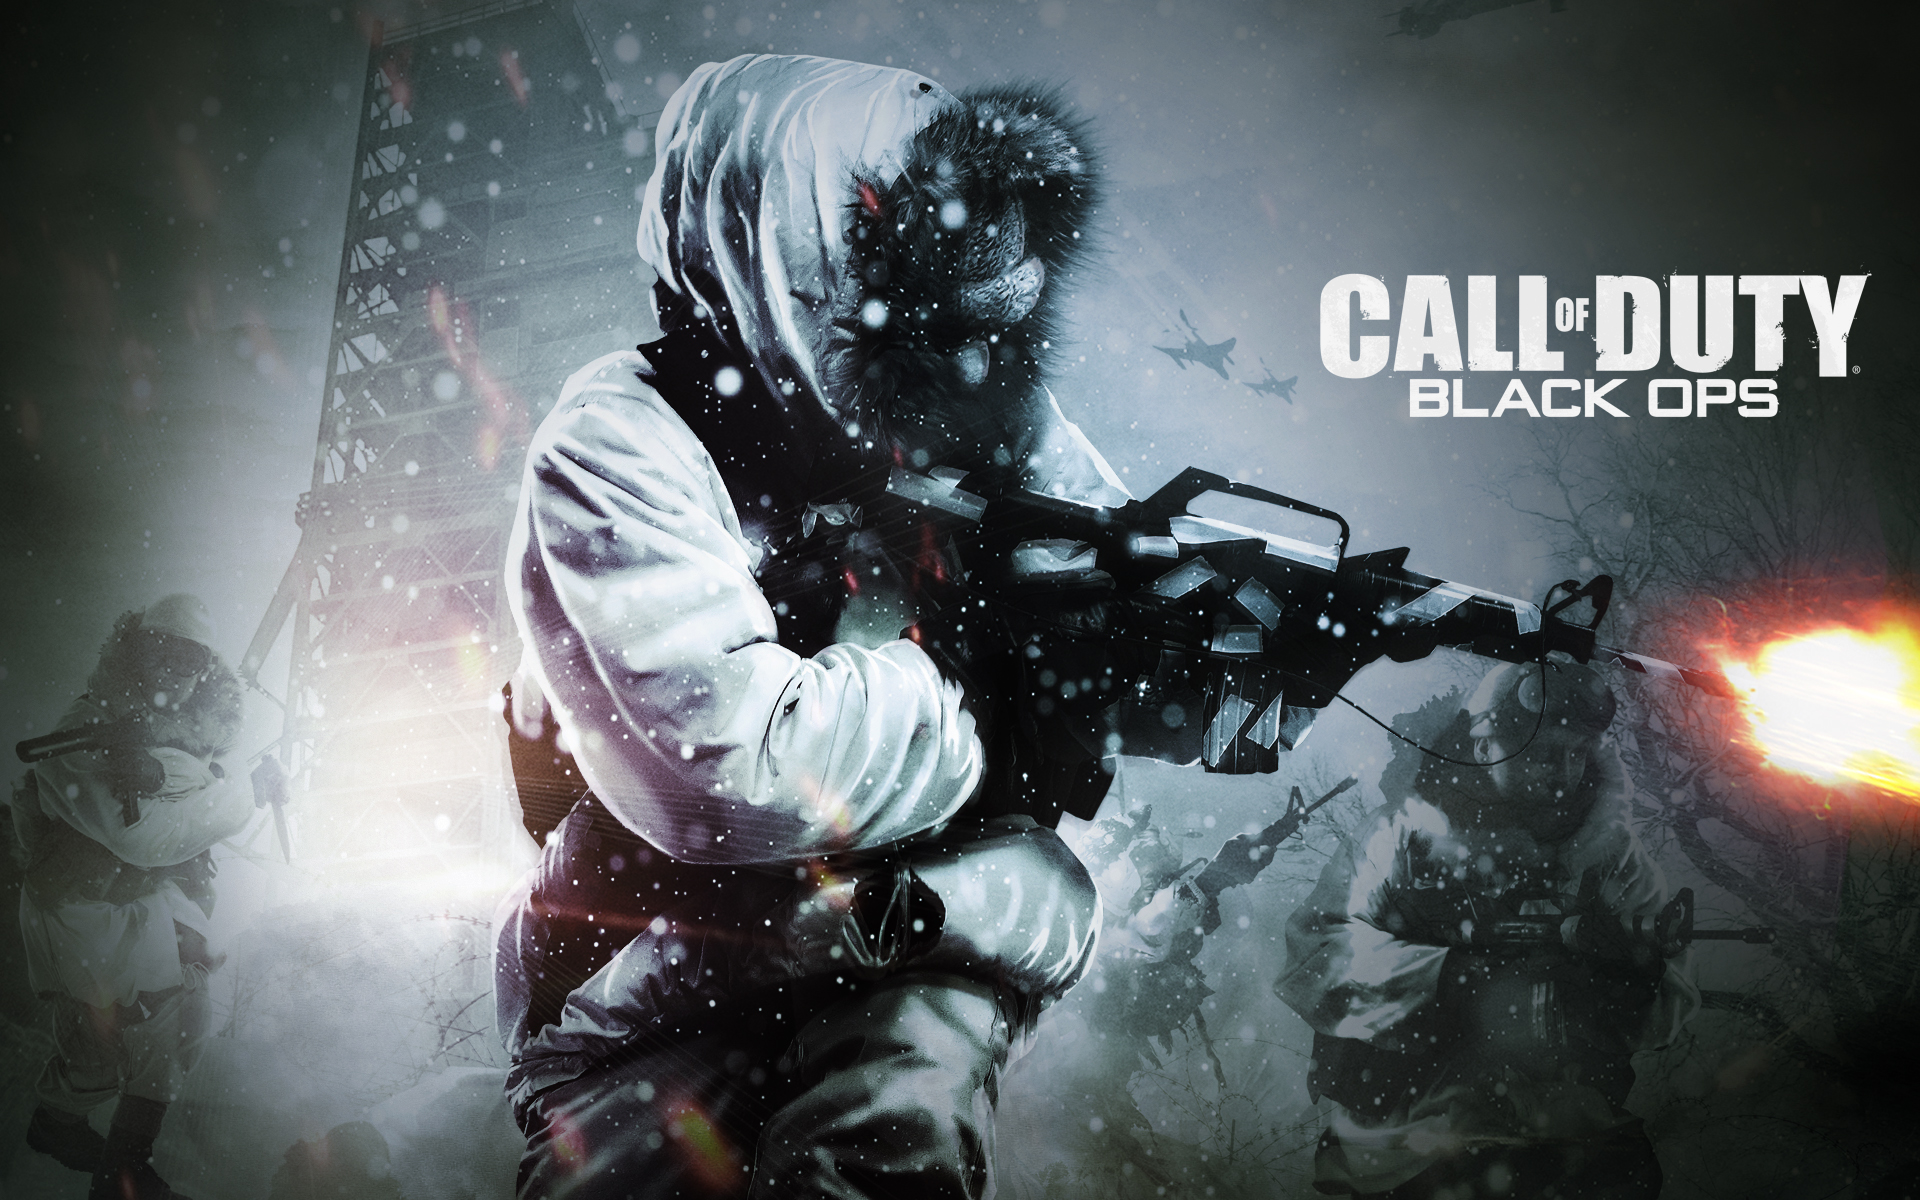 Call_of_Duty_Black_Ops_Wallpaper_01